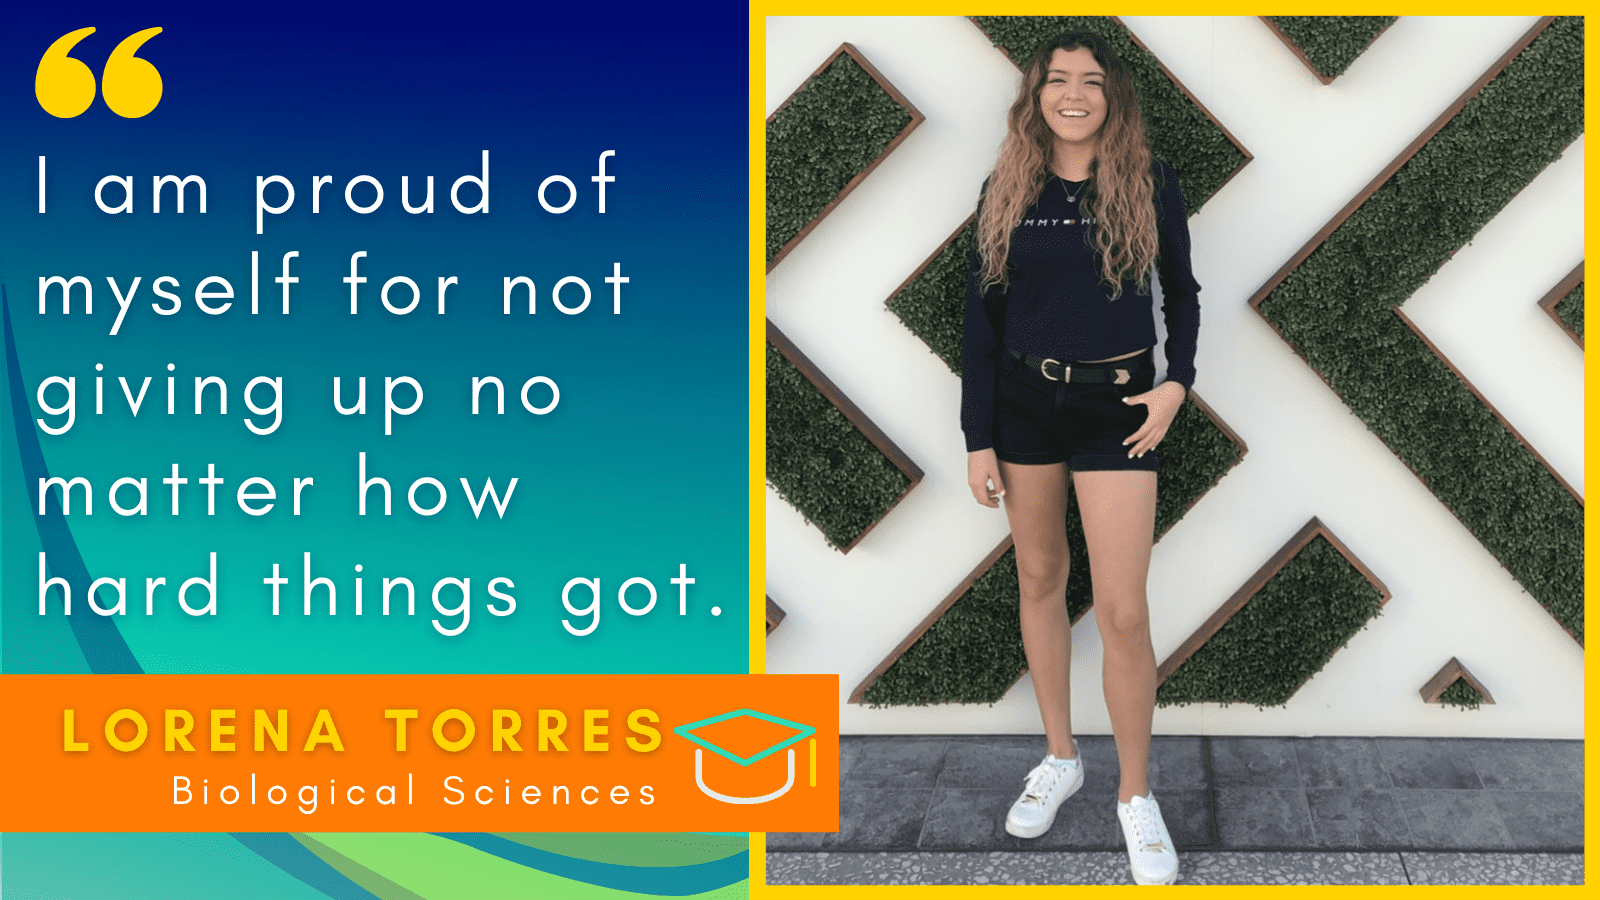 Image of Lorena Torres with her quote.